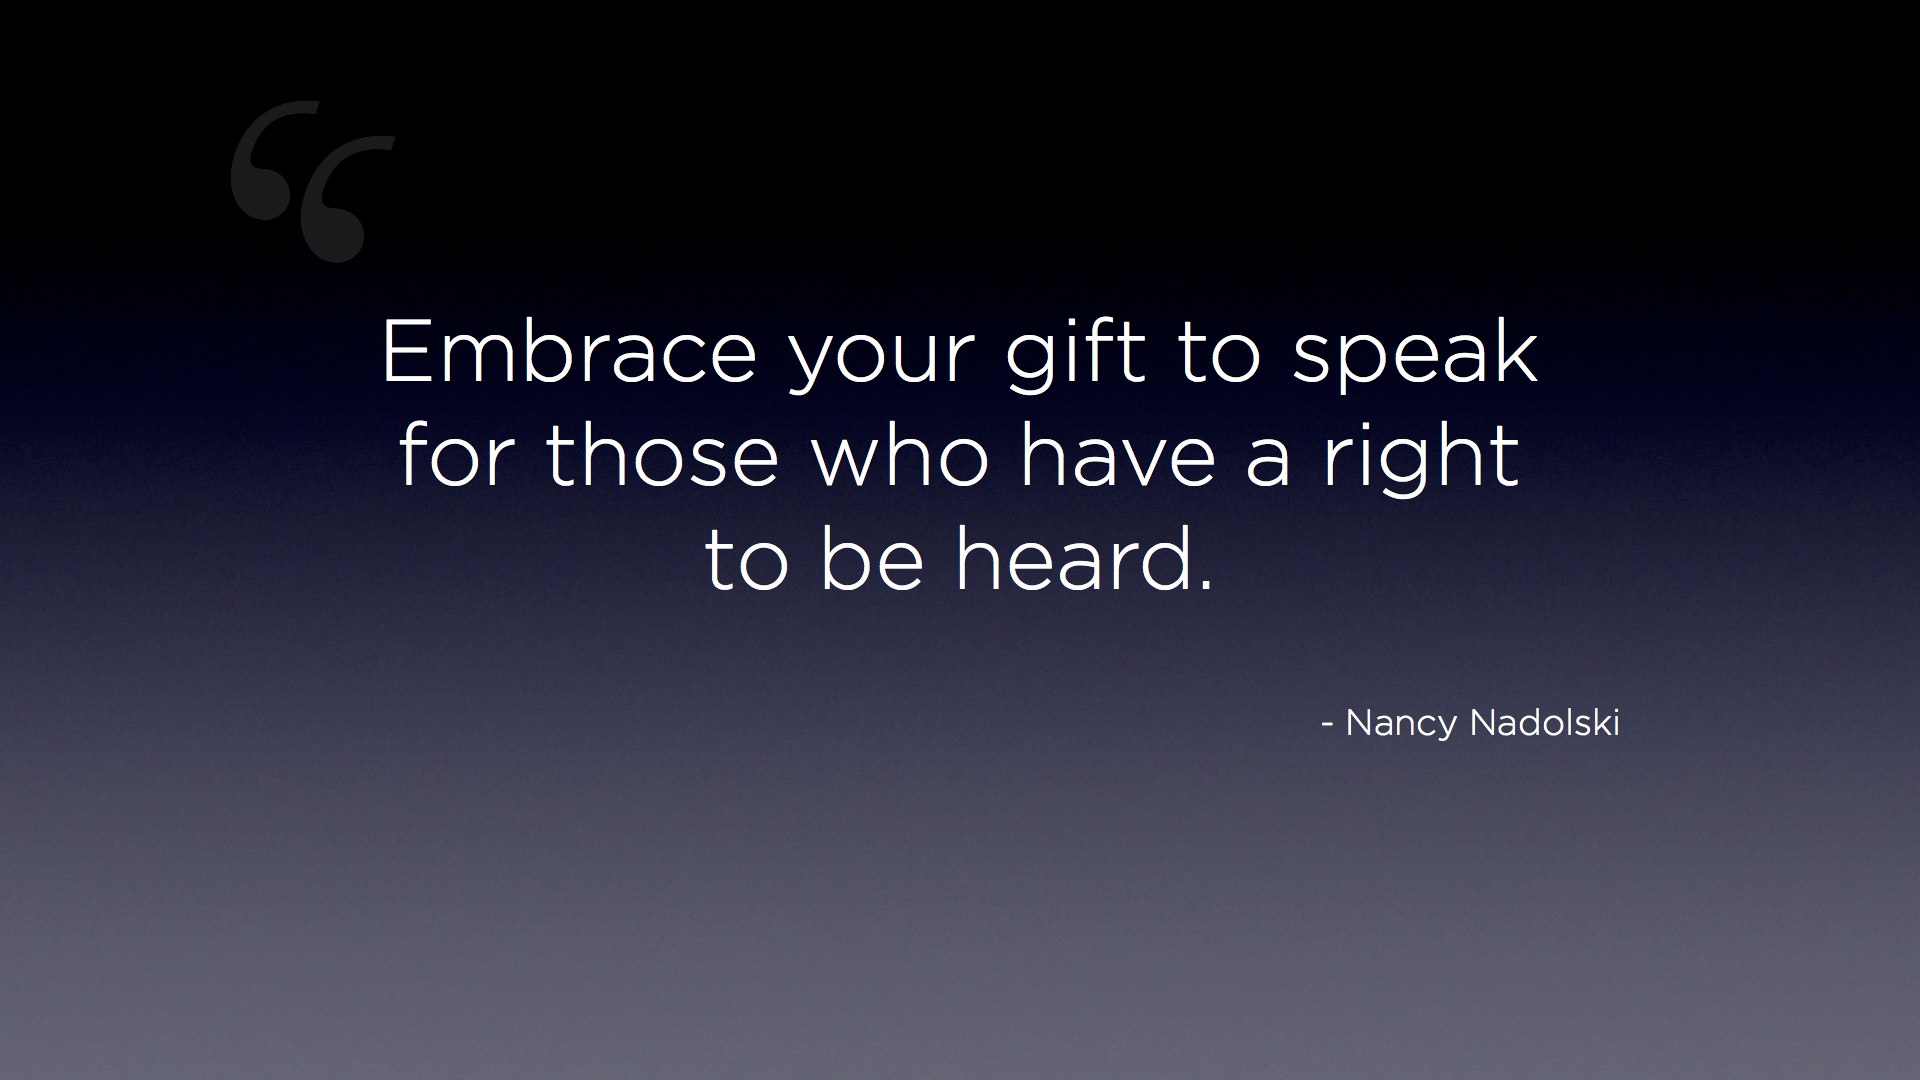 "Embrace your gift to speak for those who have a right to be heard." - Nancy Nadolski quote